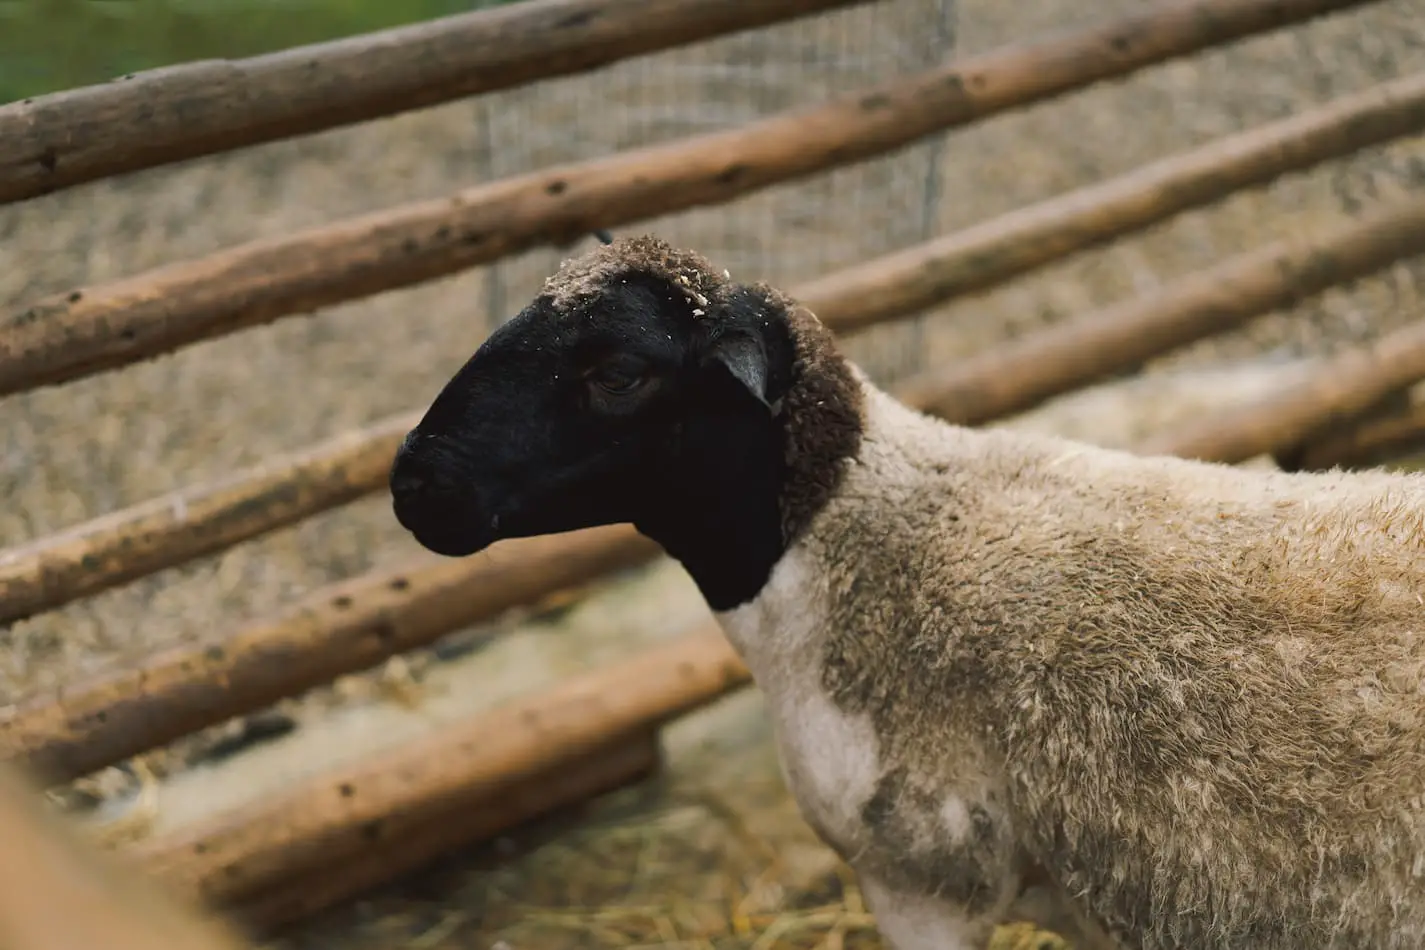 Image of a Dorper sheep in front of fencing.